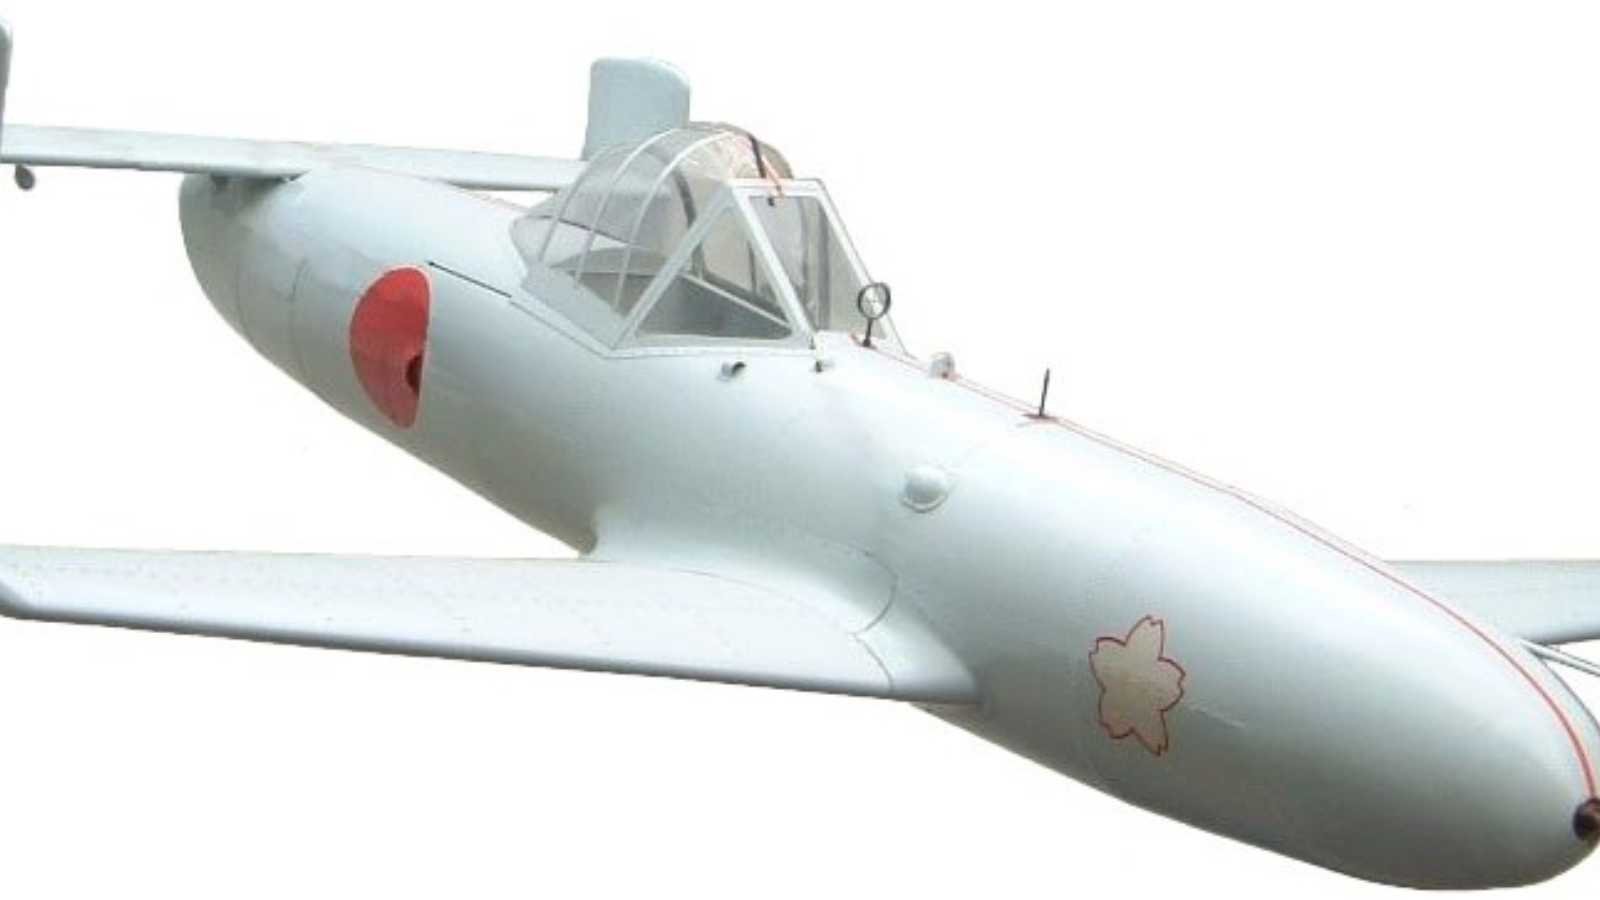 <p>Japan struggled to keep up with British and U.S. technology, but they developed a rocket-powered, human-guided missile known as the Cherry Blossom or Ohka. It was used as a kamikaze weapon at the end of the war.</p>